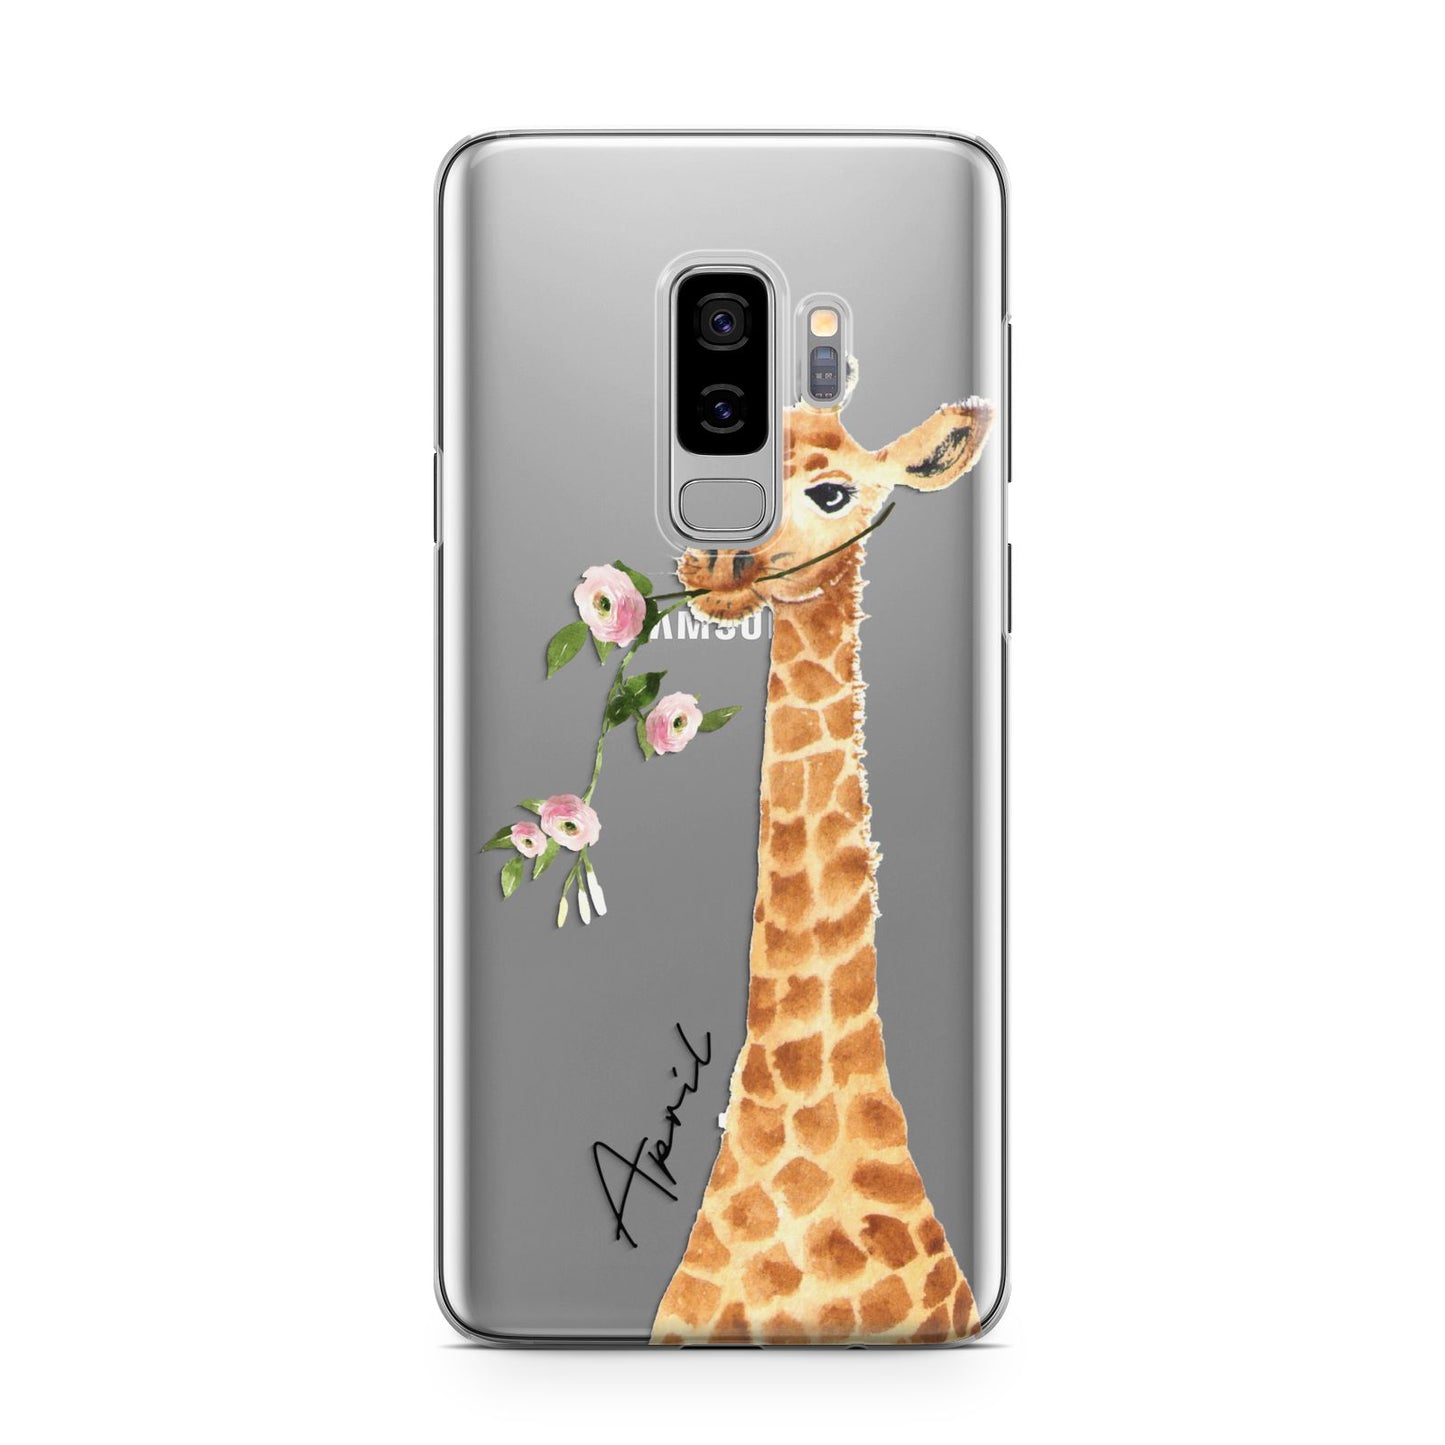 Personalised Giraffe with Name Samsung Galaxy S9 Plus Case on Silver phone